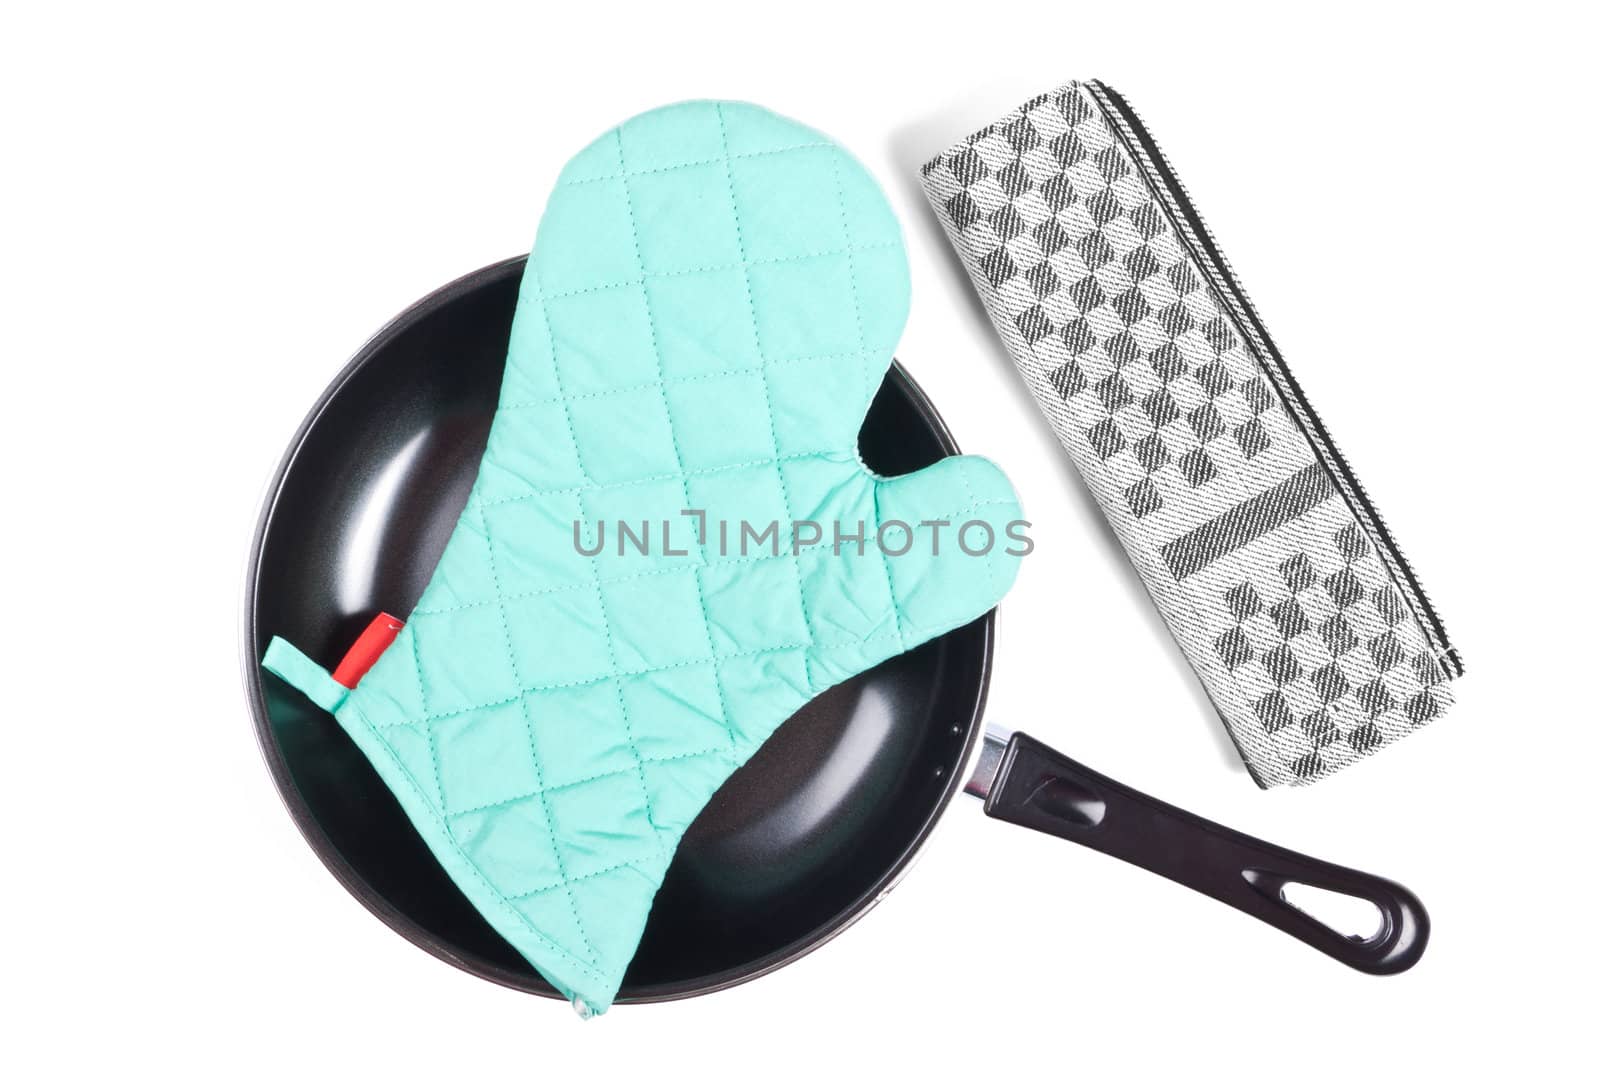 Kitchen glove in pan with grater by shutswis